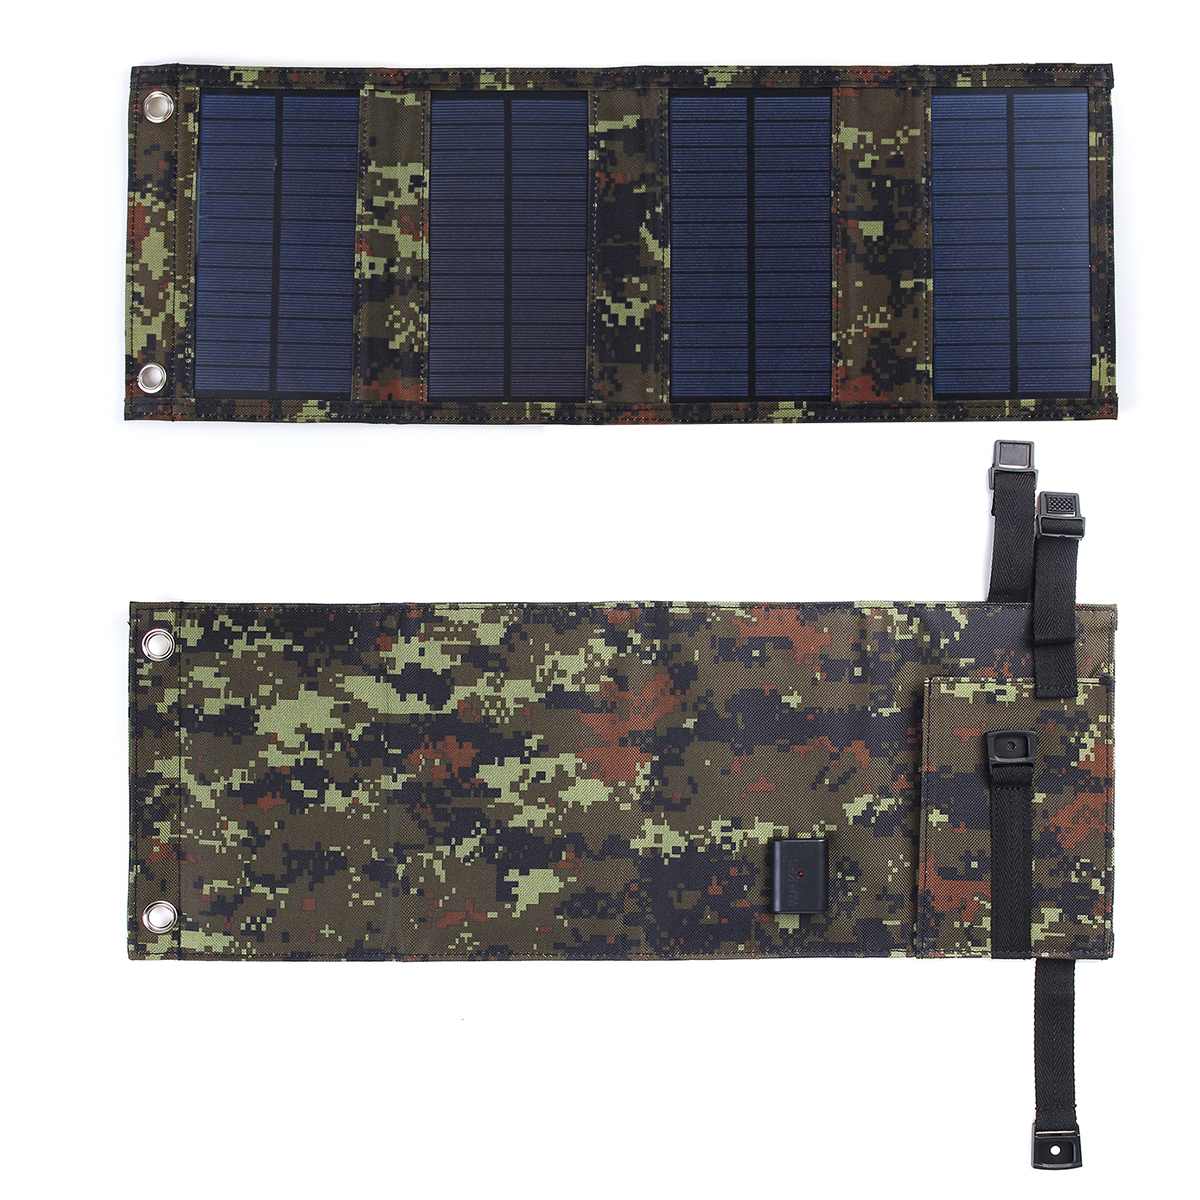 Portable 50W 5V Solar Panel Phone Charger USB Folding Solar Panels for Traval Outdoor Solar Battery Board for cellphone: Digitale Camouflage